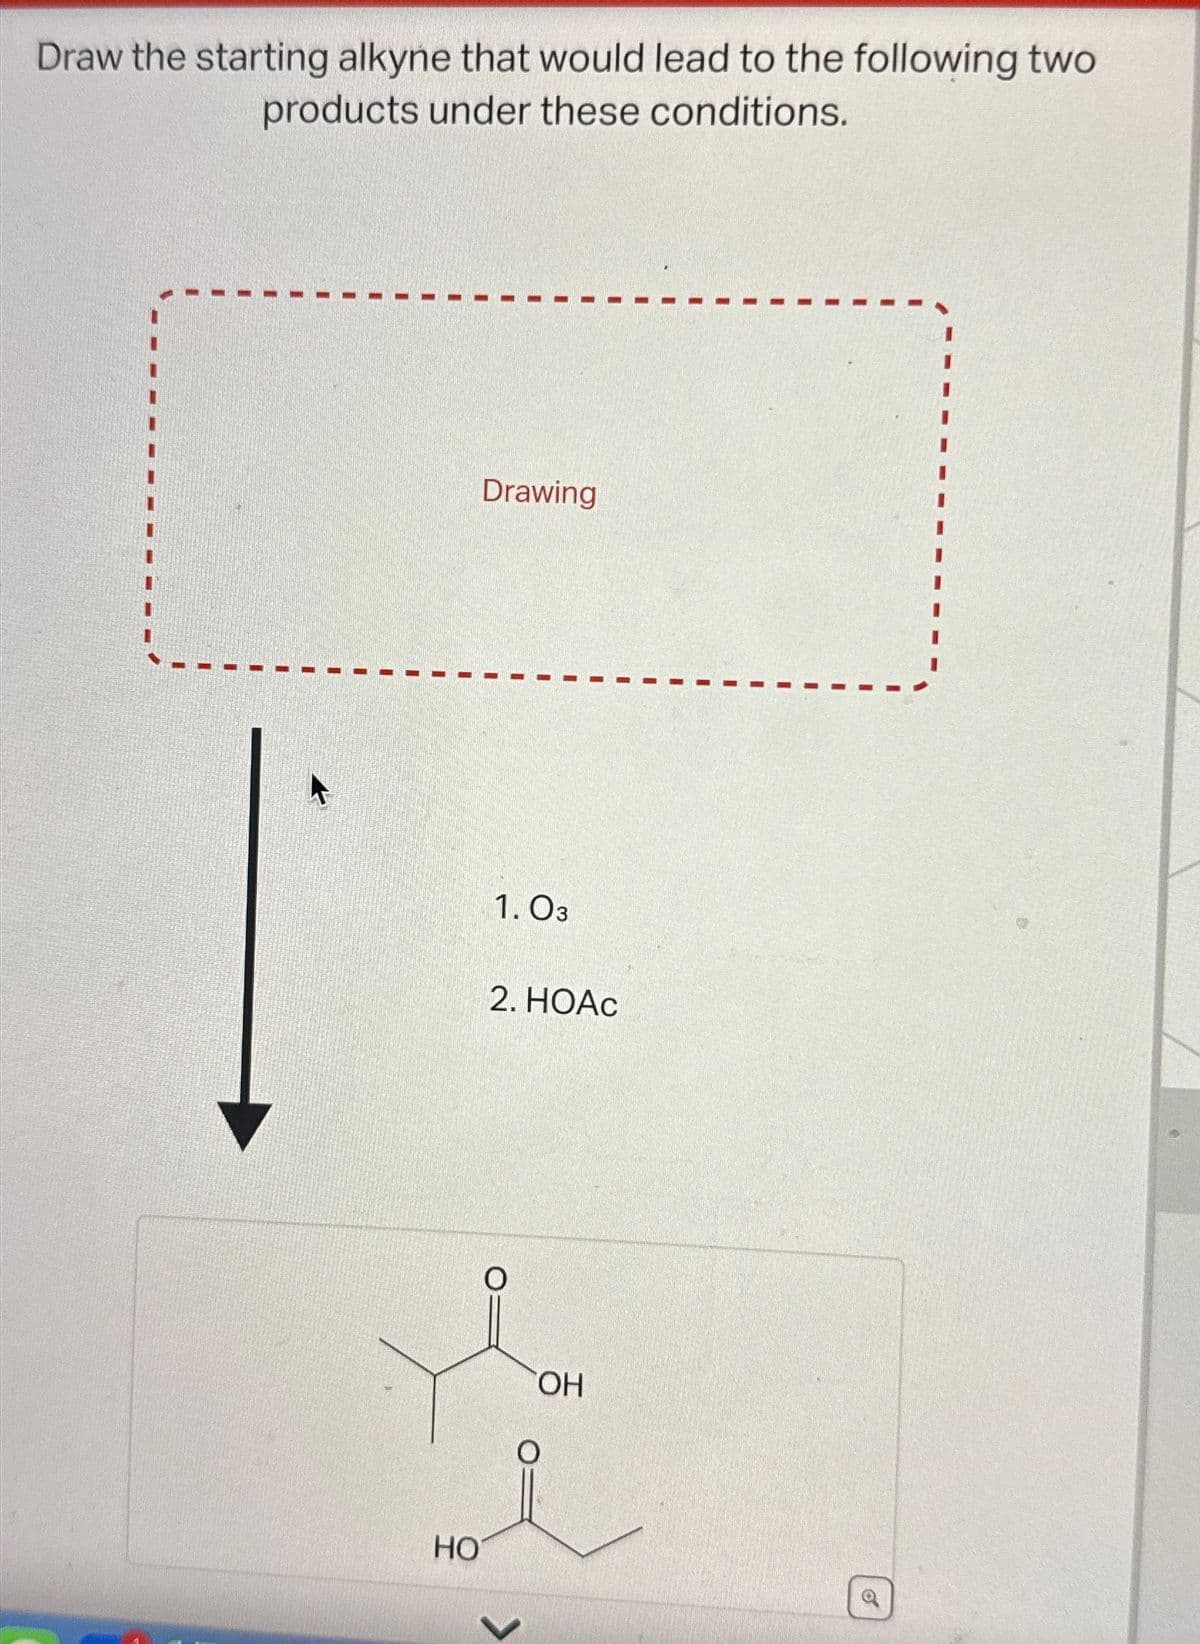 Draw the starting alkyne that would lead to the following two
products under these conditions.
HO
Drawing
1.03
2. HOAc
O
<
OH